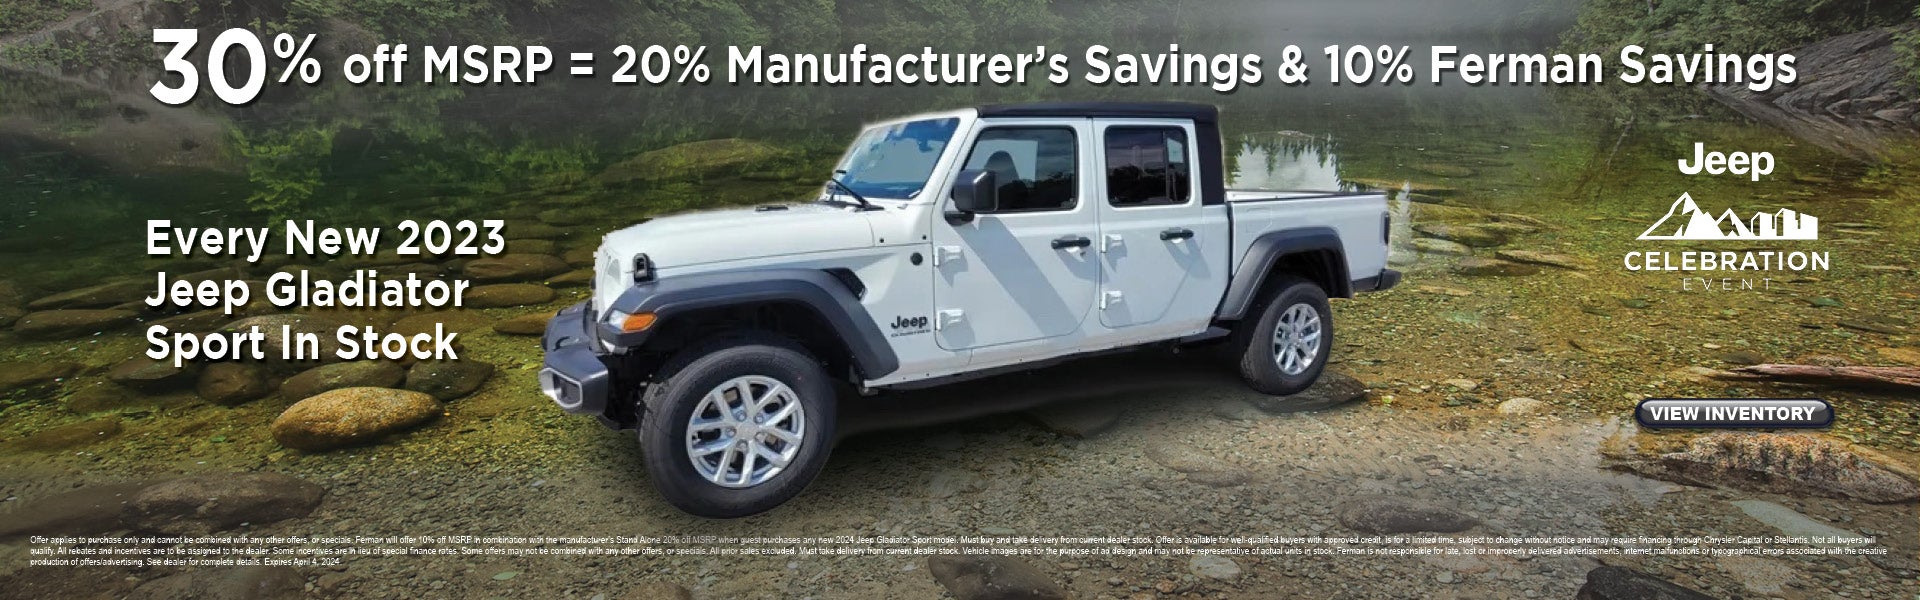 30% off MSRP on All New 2023 Jeep Gladiator Sports